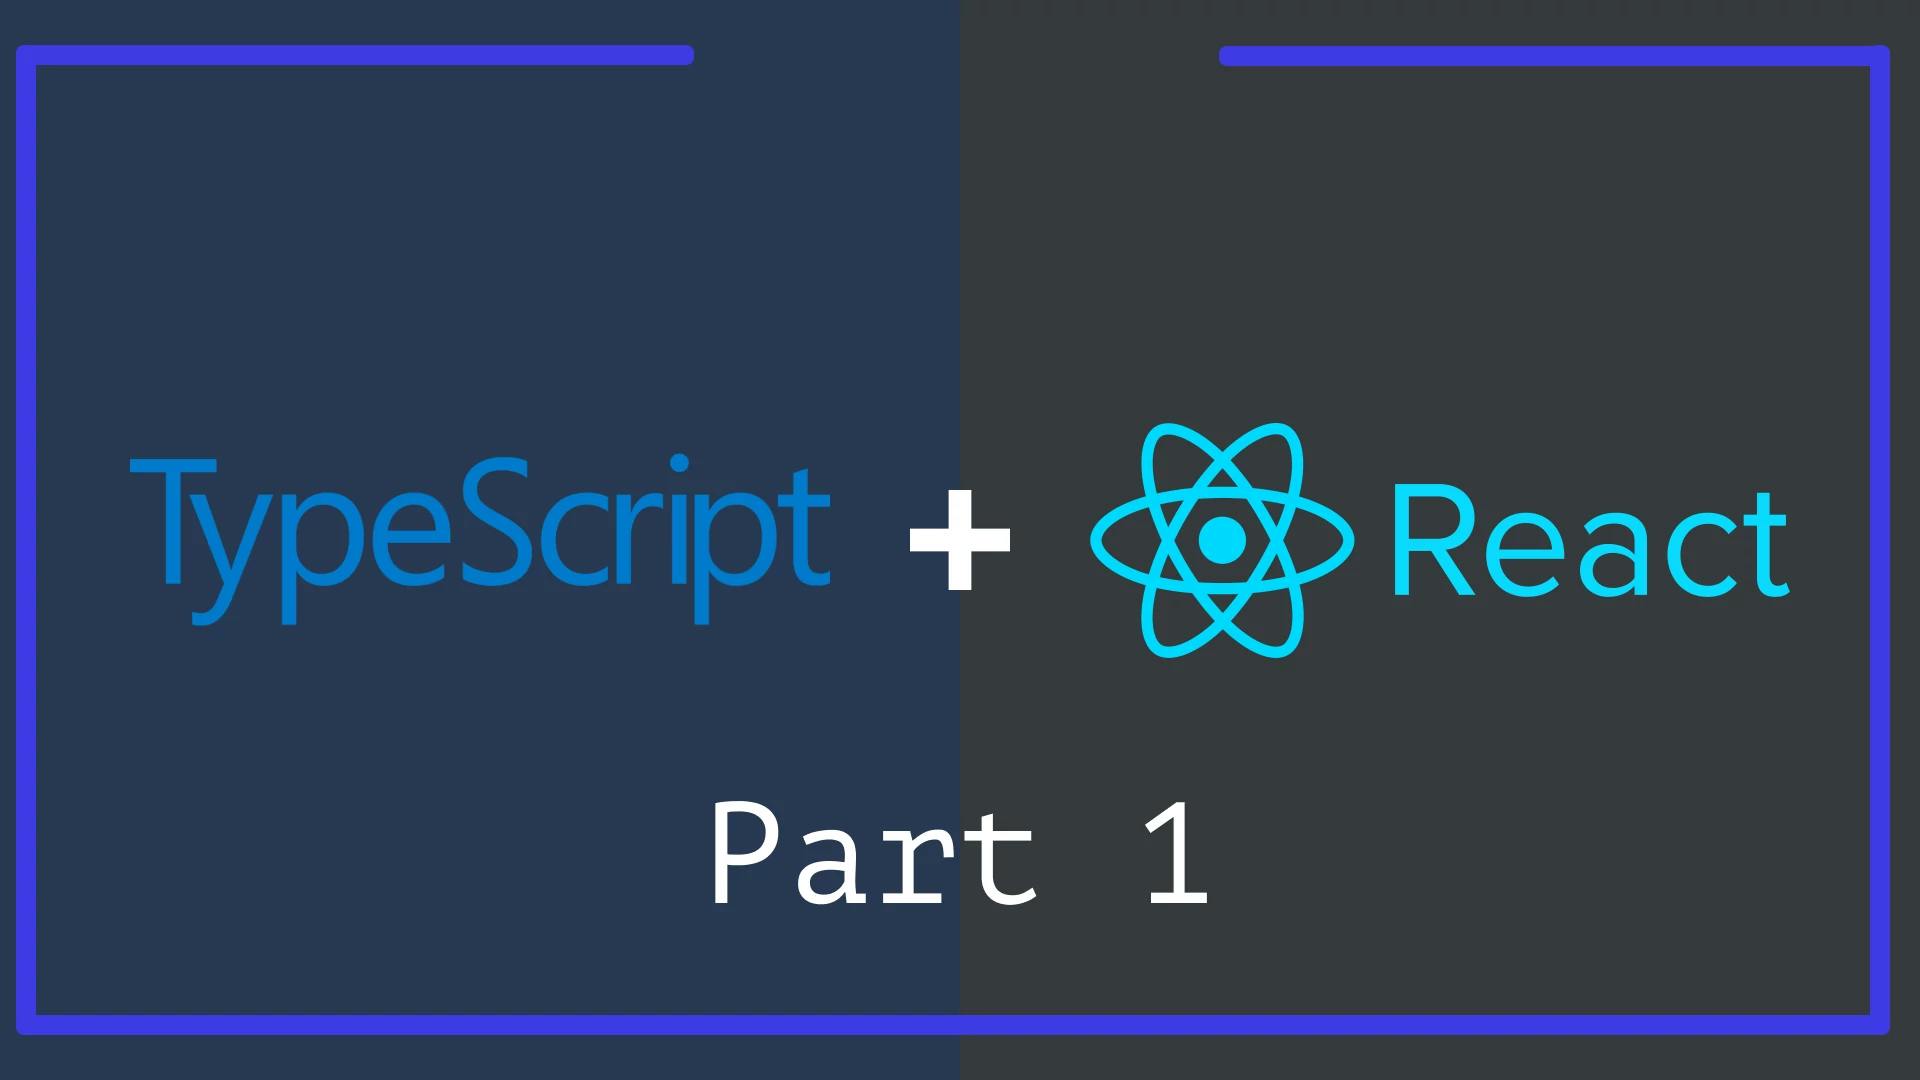 Here is what every React Developer needs to know about TypeScript - Part 1 cover image